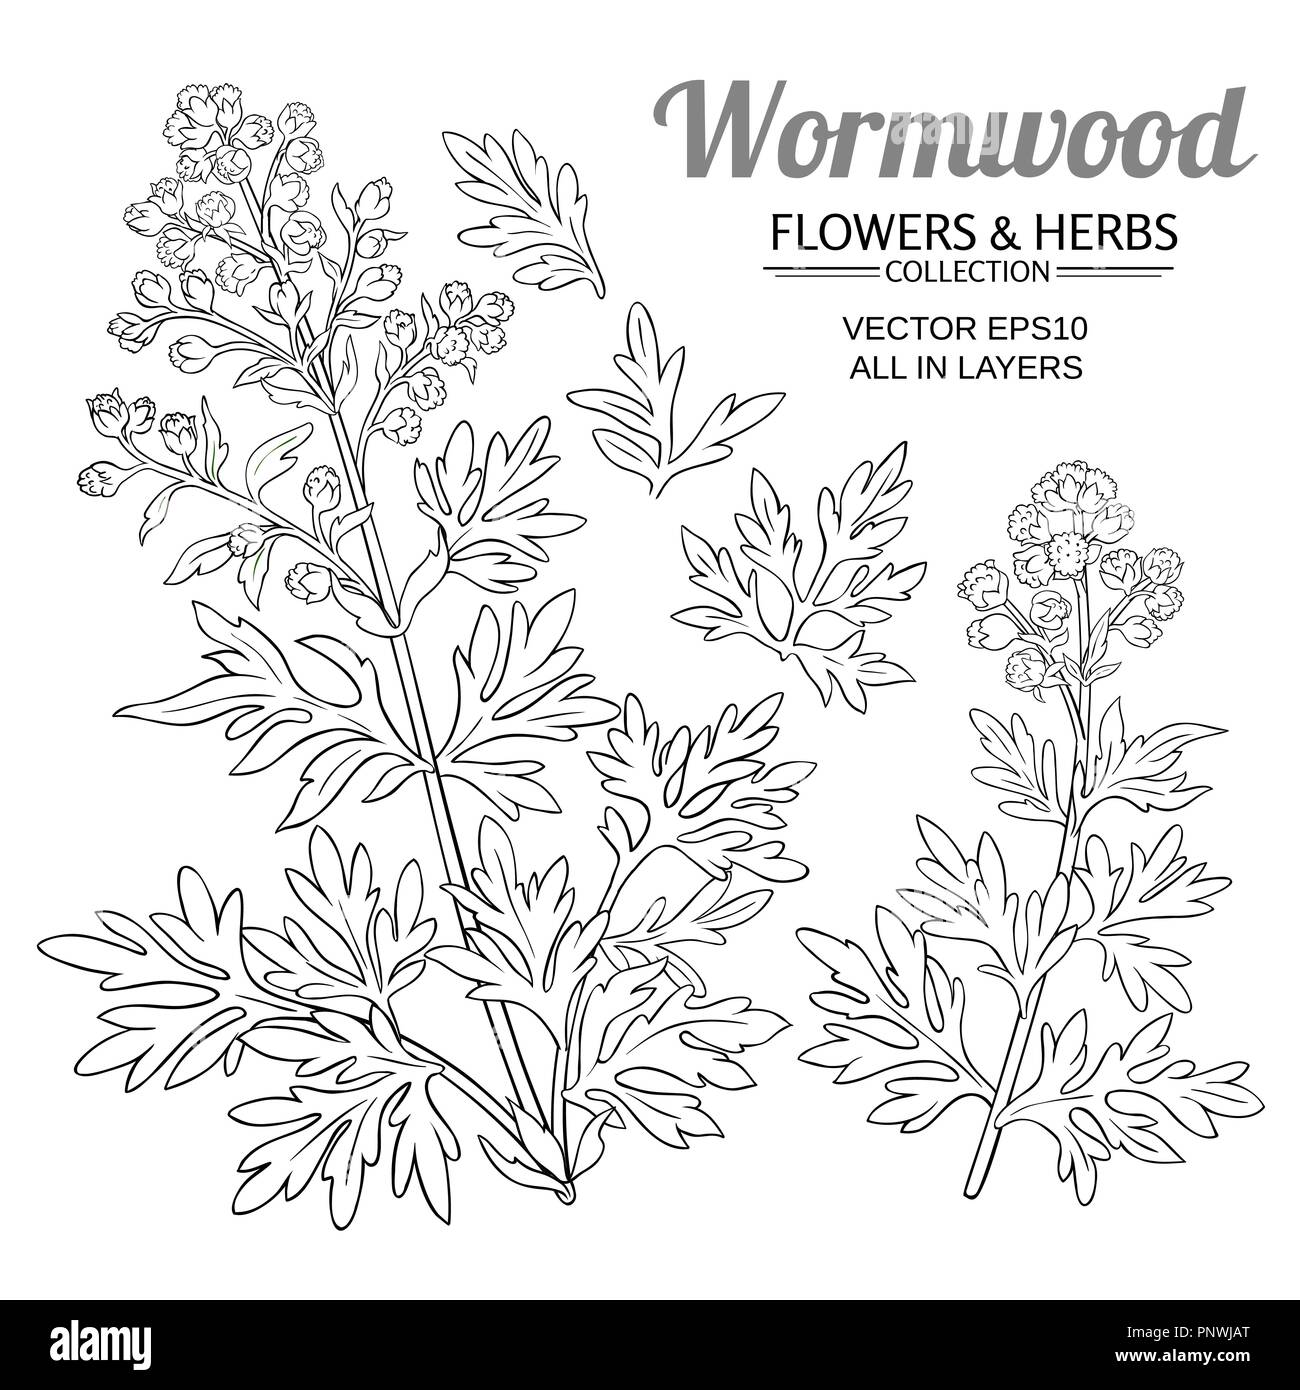 wormwood vector set on white background Stock Vector